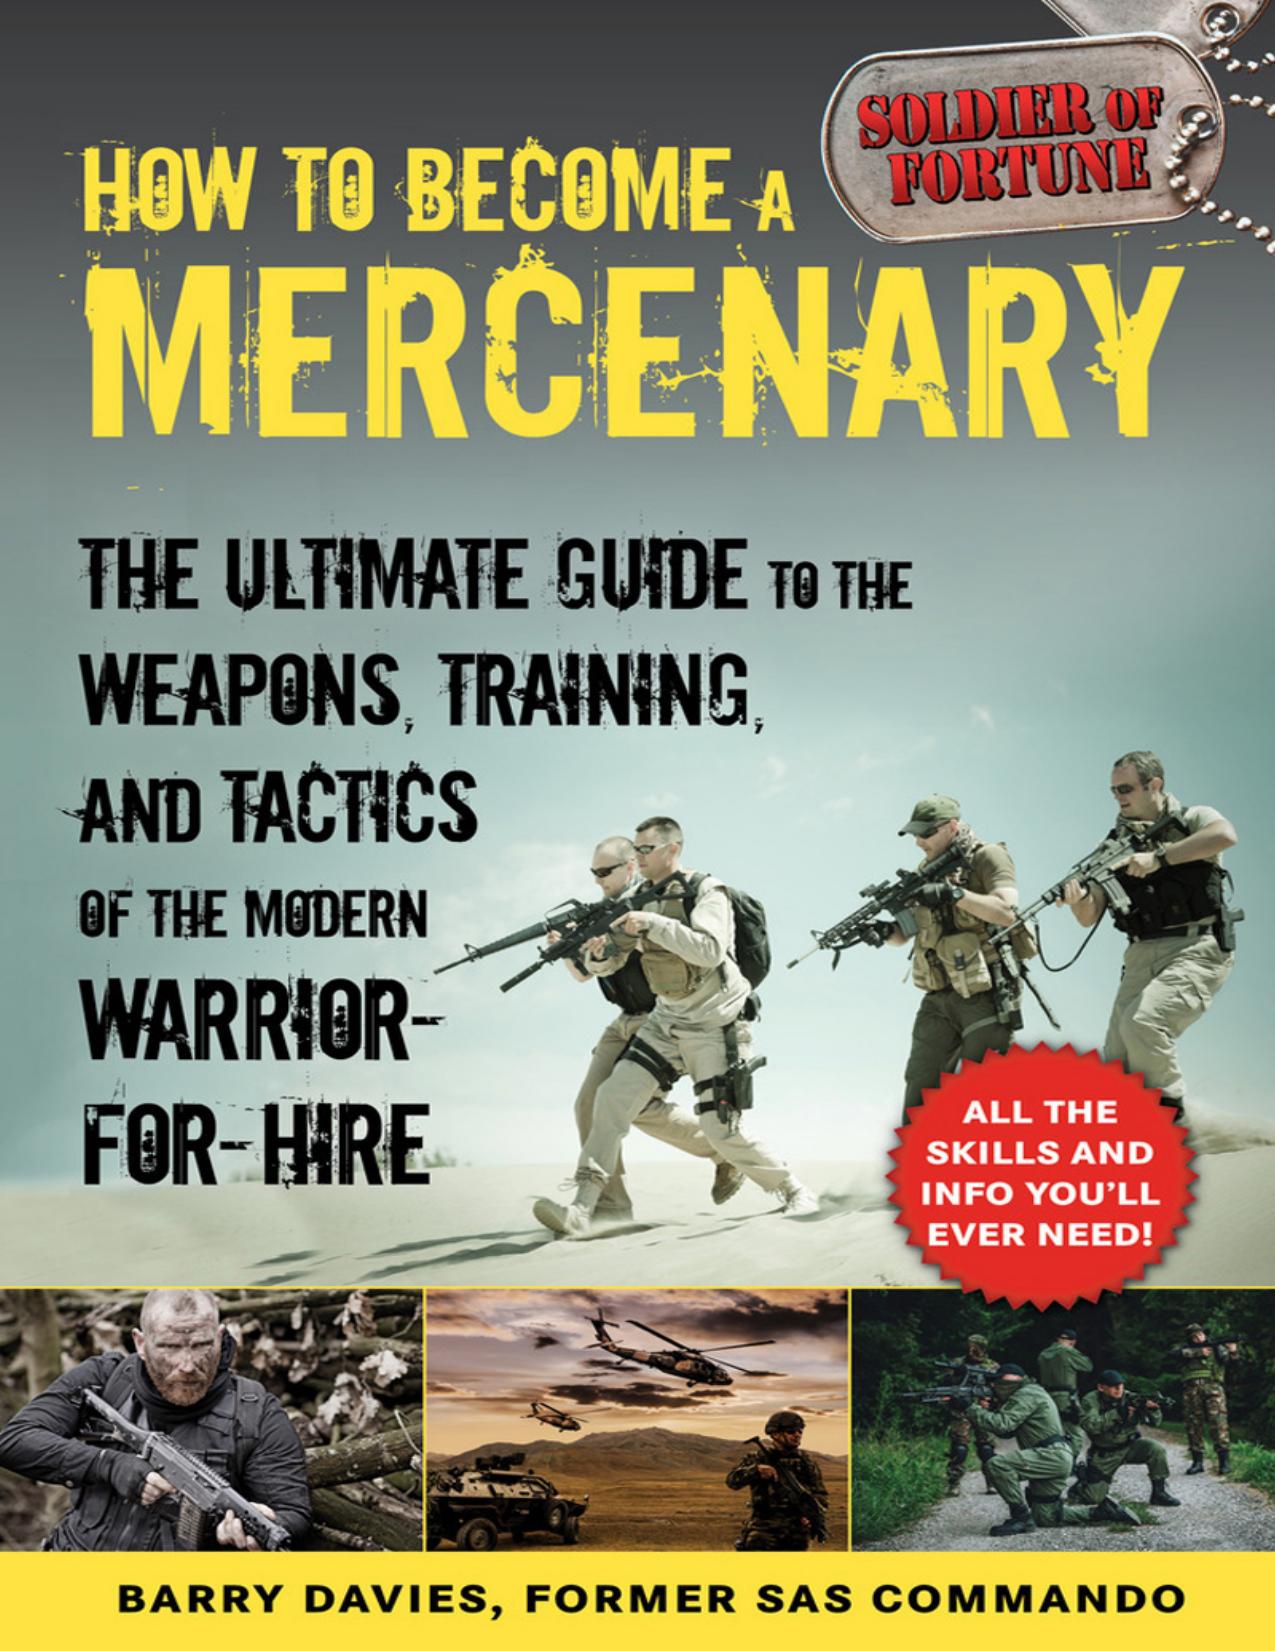 How to Become a Mercenary by Barry Davies